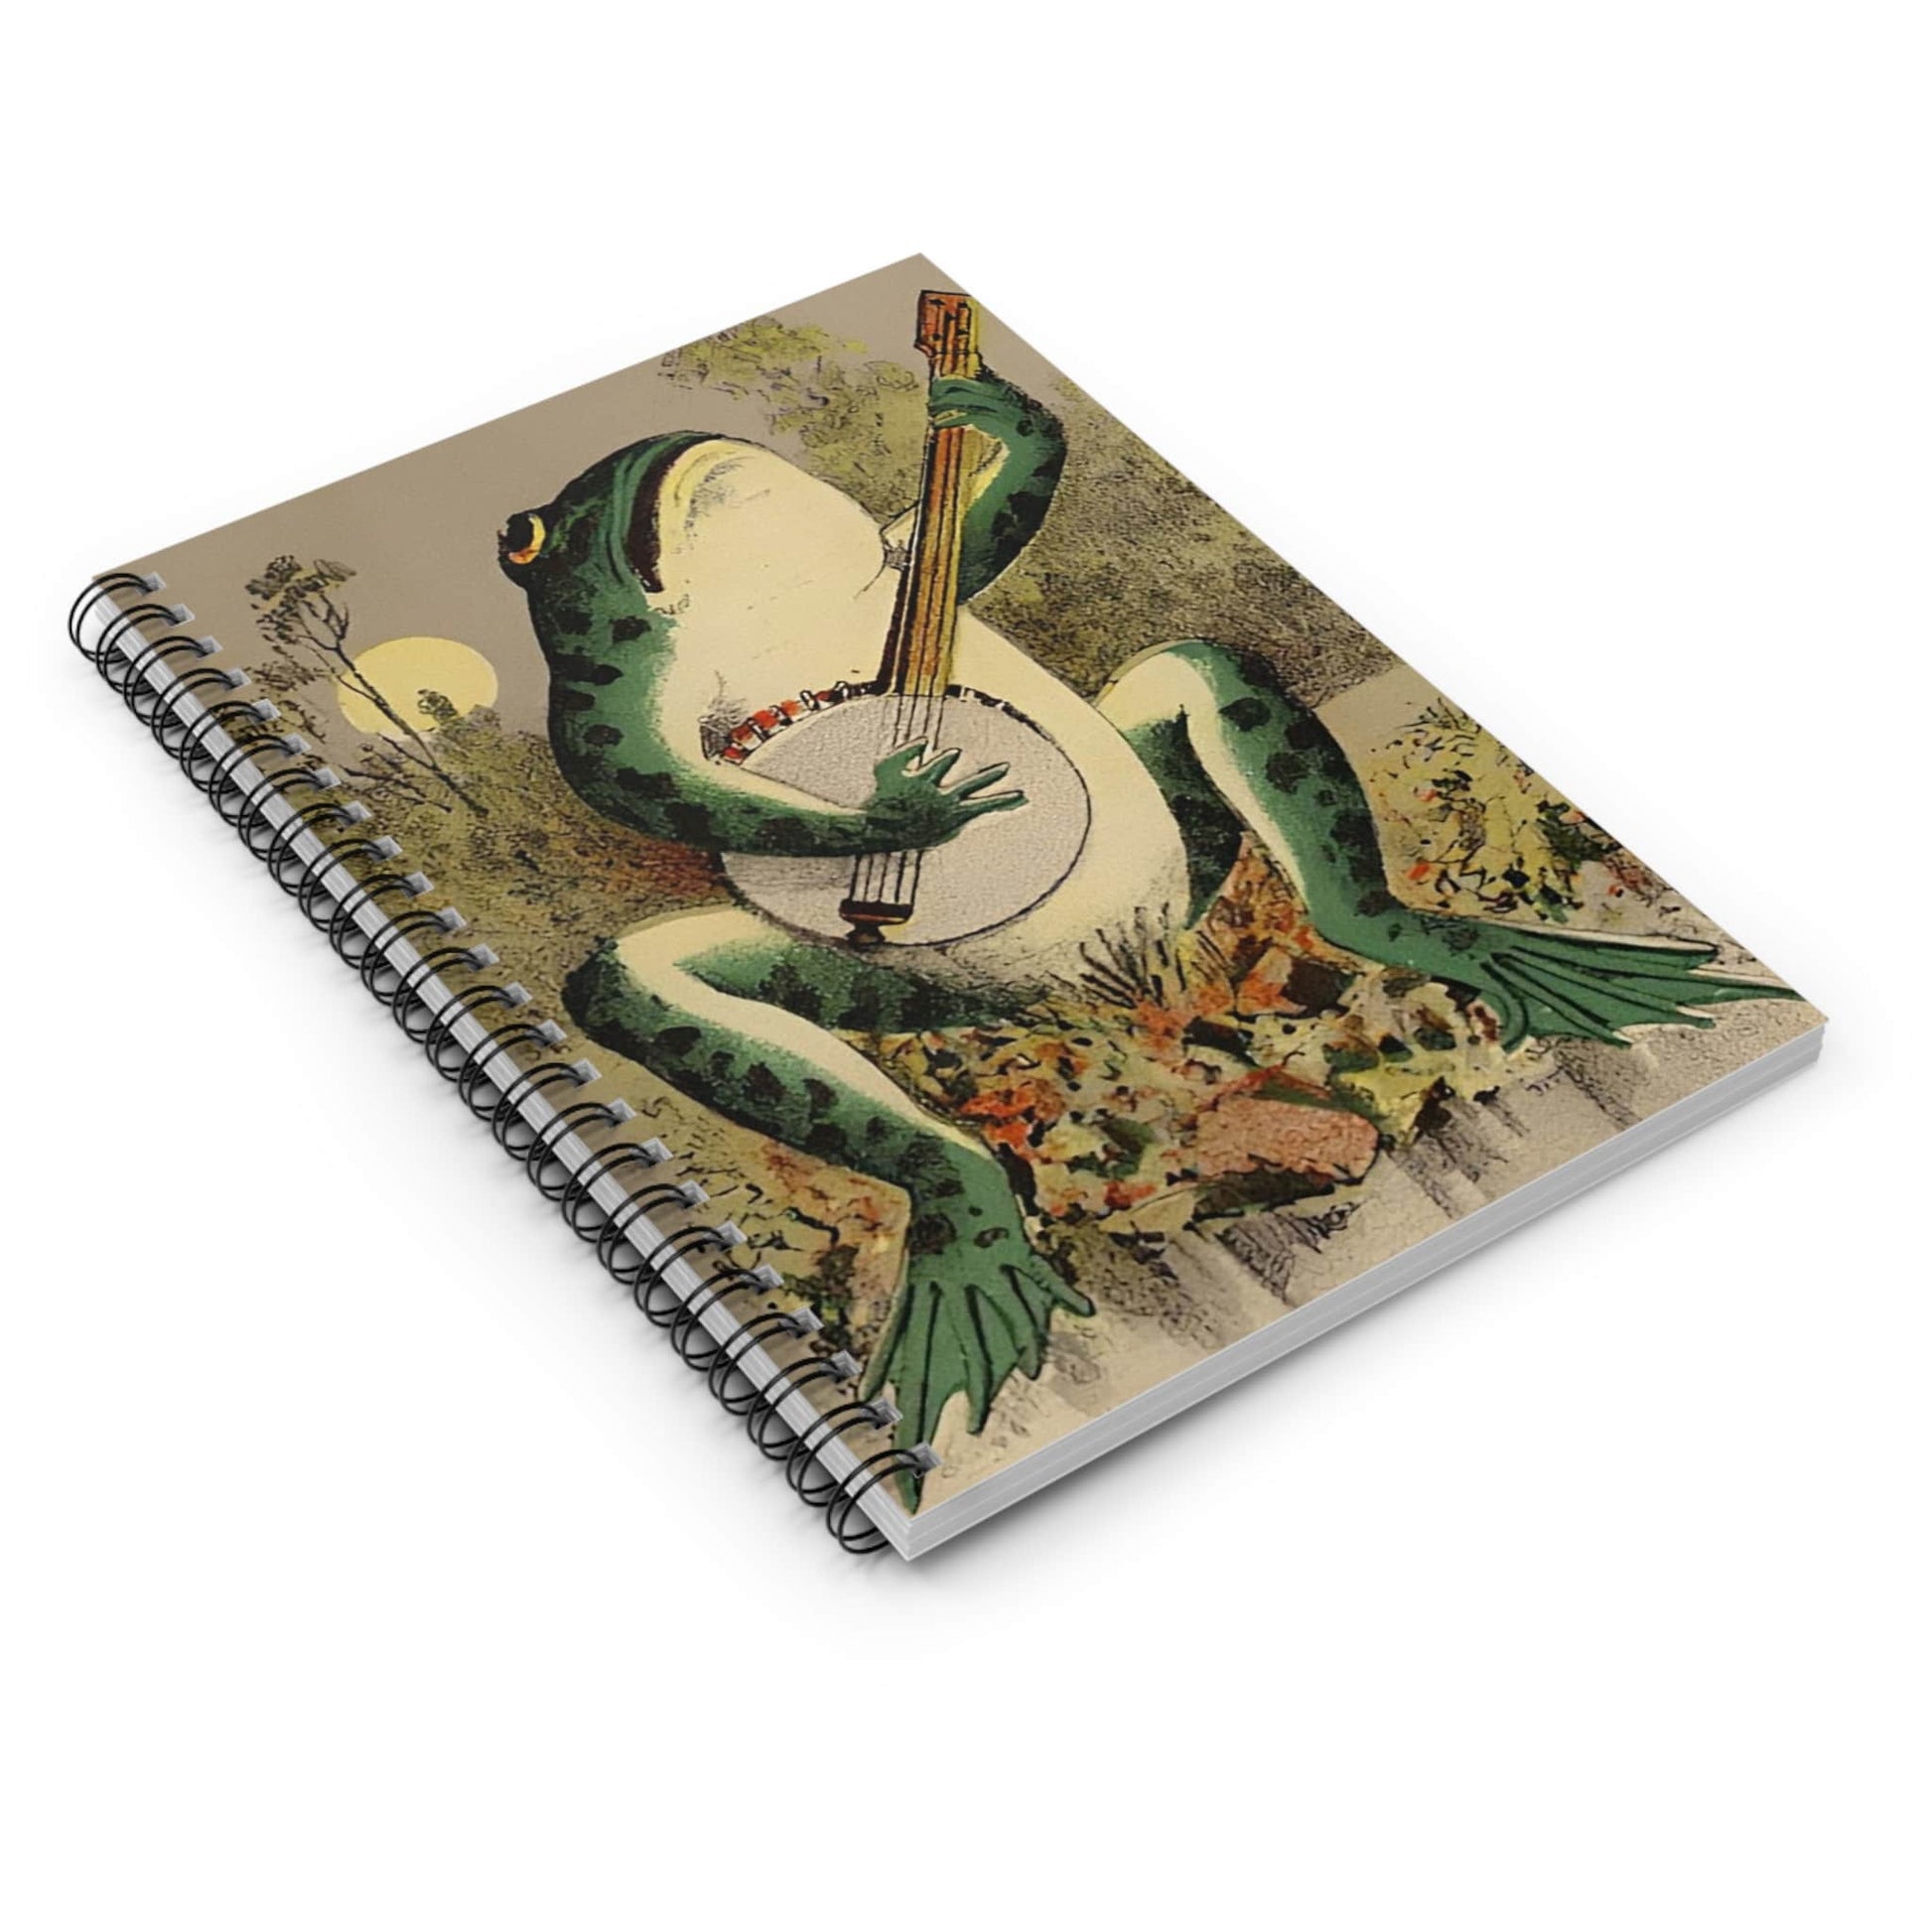 Funny Animal Spiral Notebook Laying Flat on White Surface